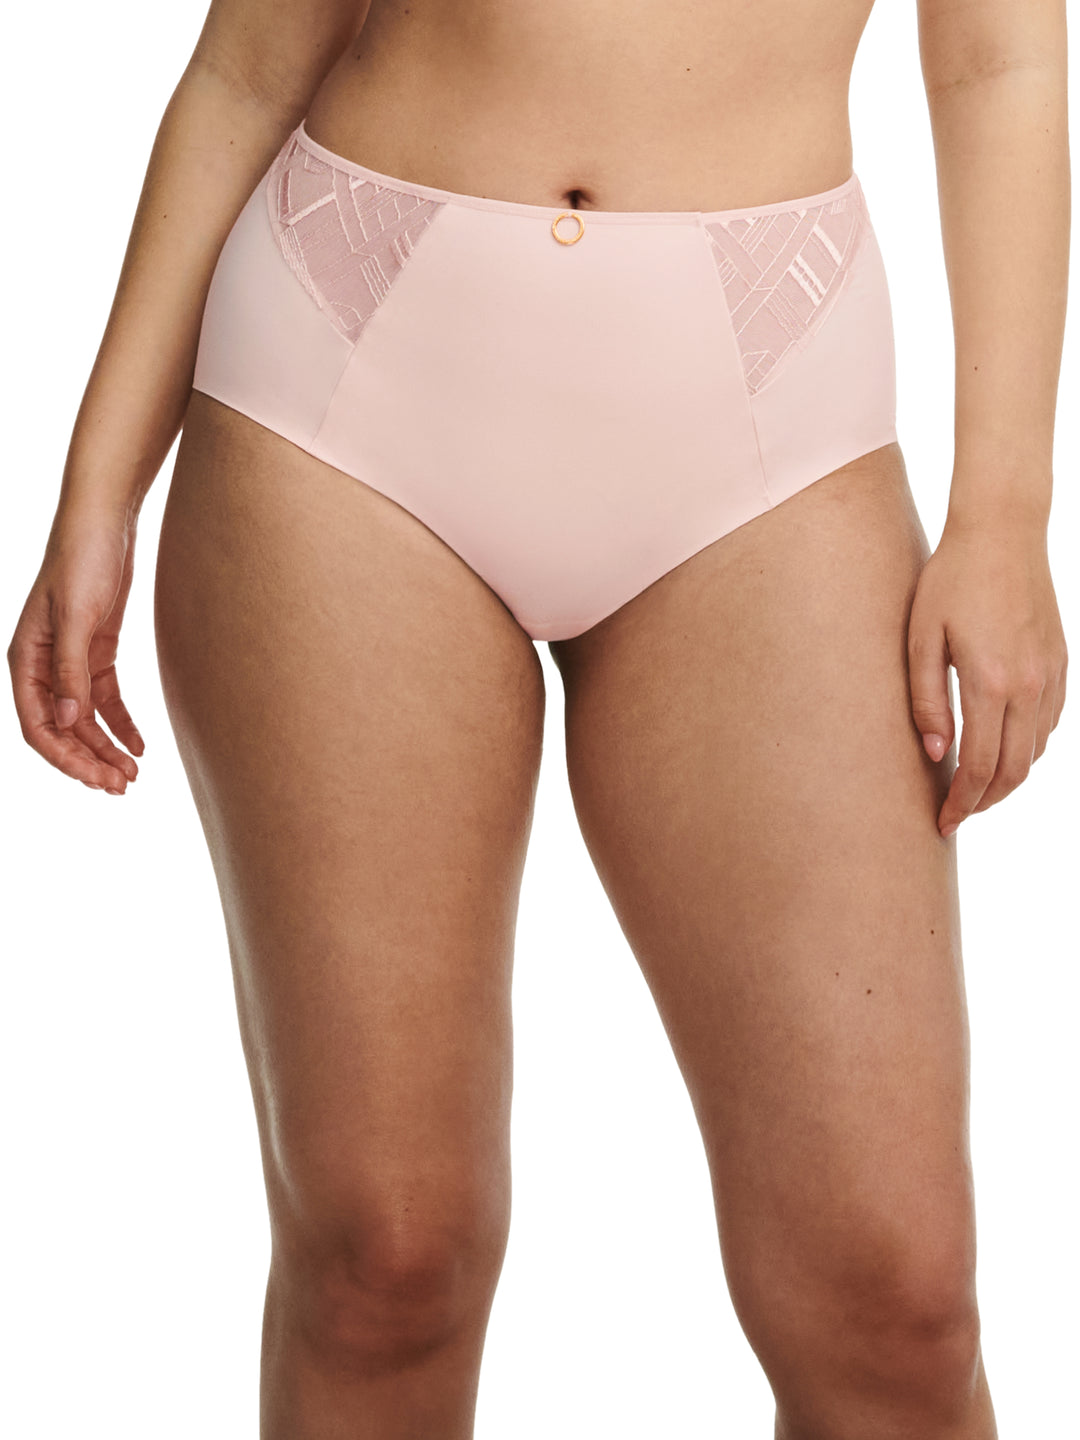 Chantelle - Graphic Support High Waisted Support Full Brief Taffeta Pink